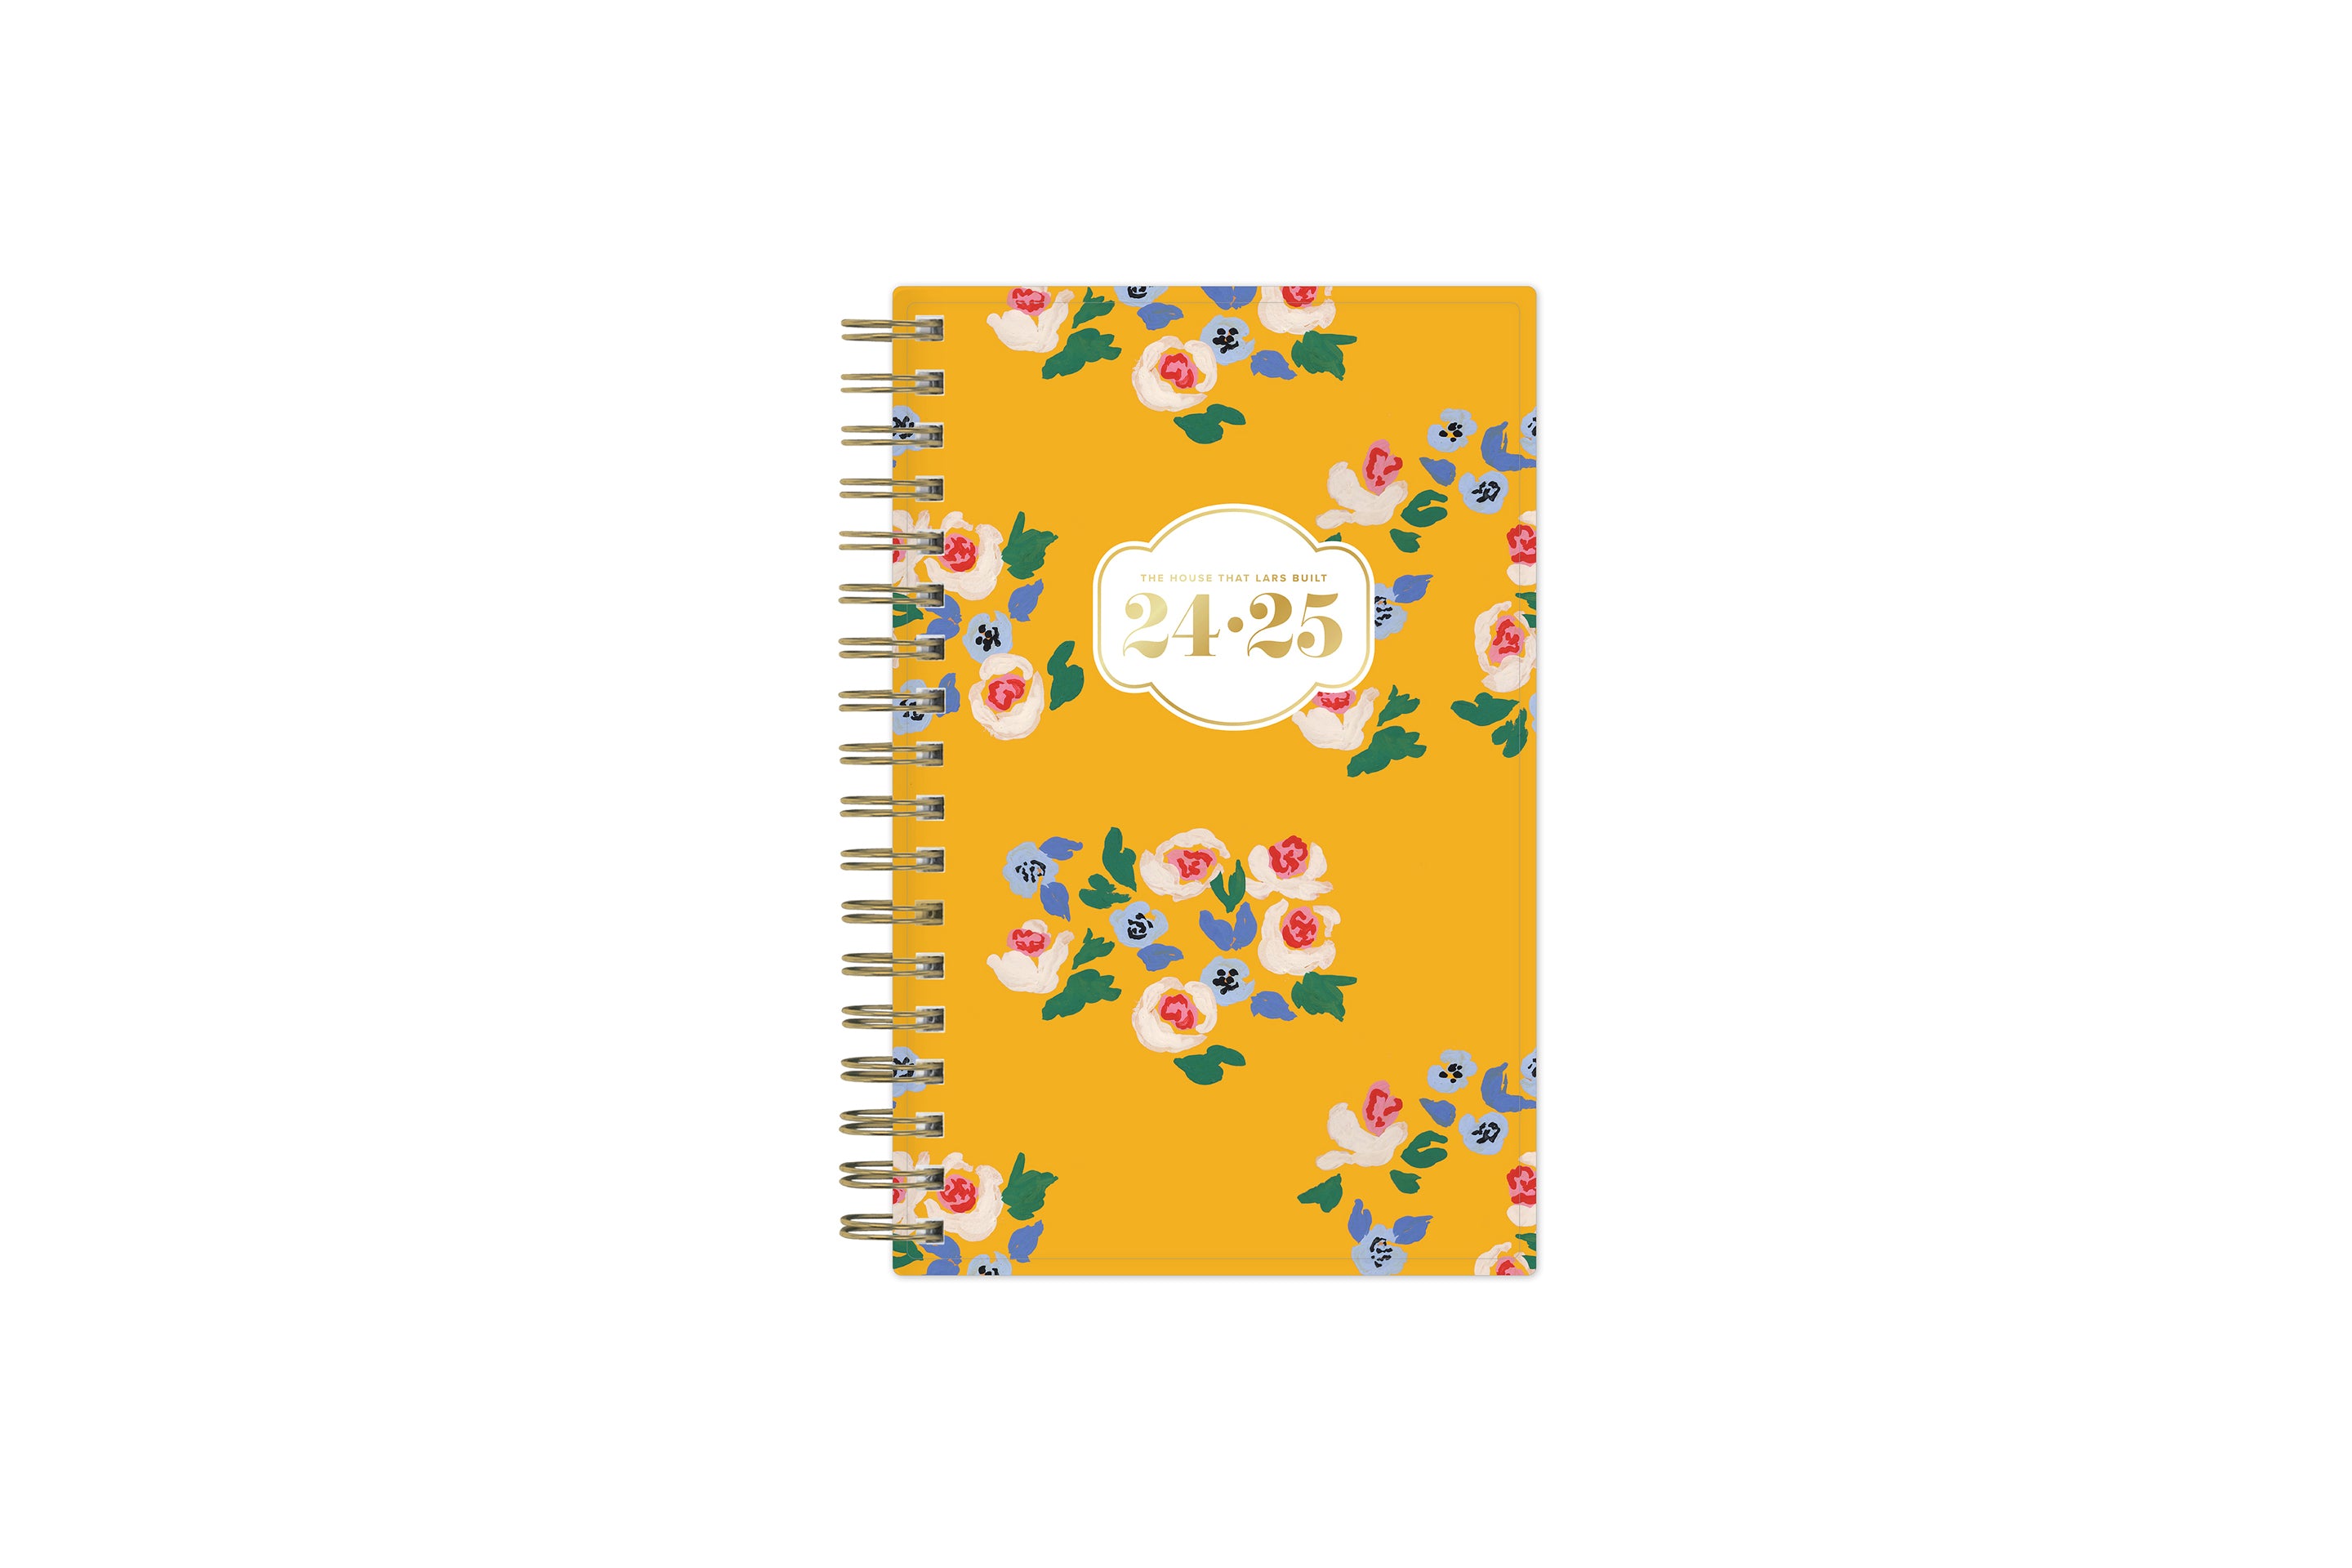 gold yellow background with white and pink fllowers in this pocket sized planner 3.625x6.125